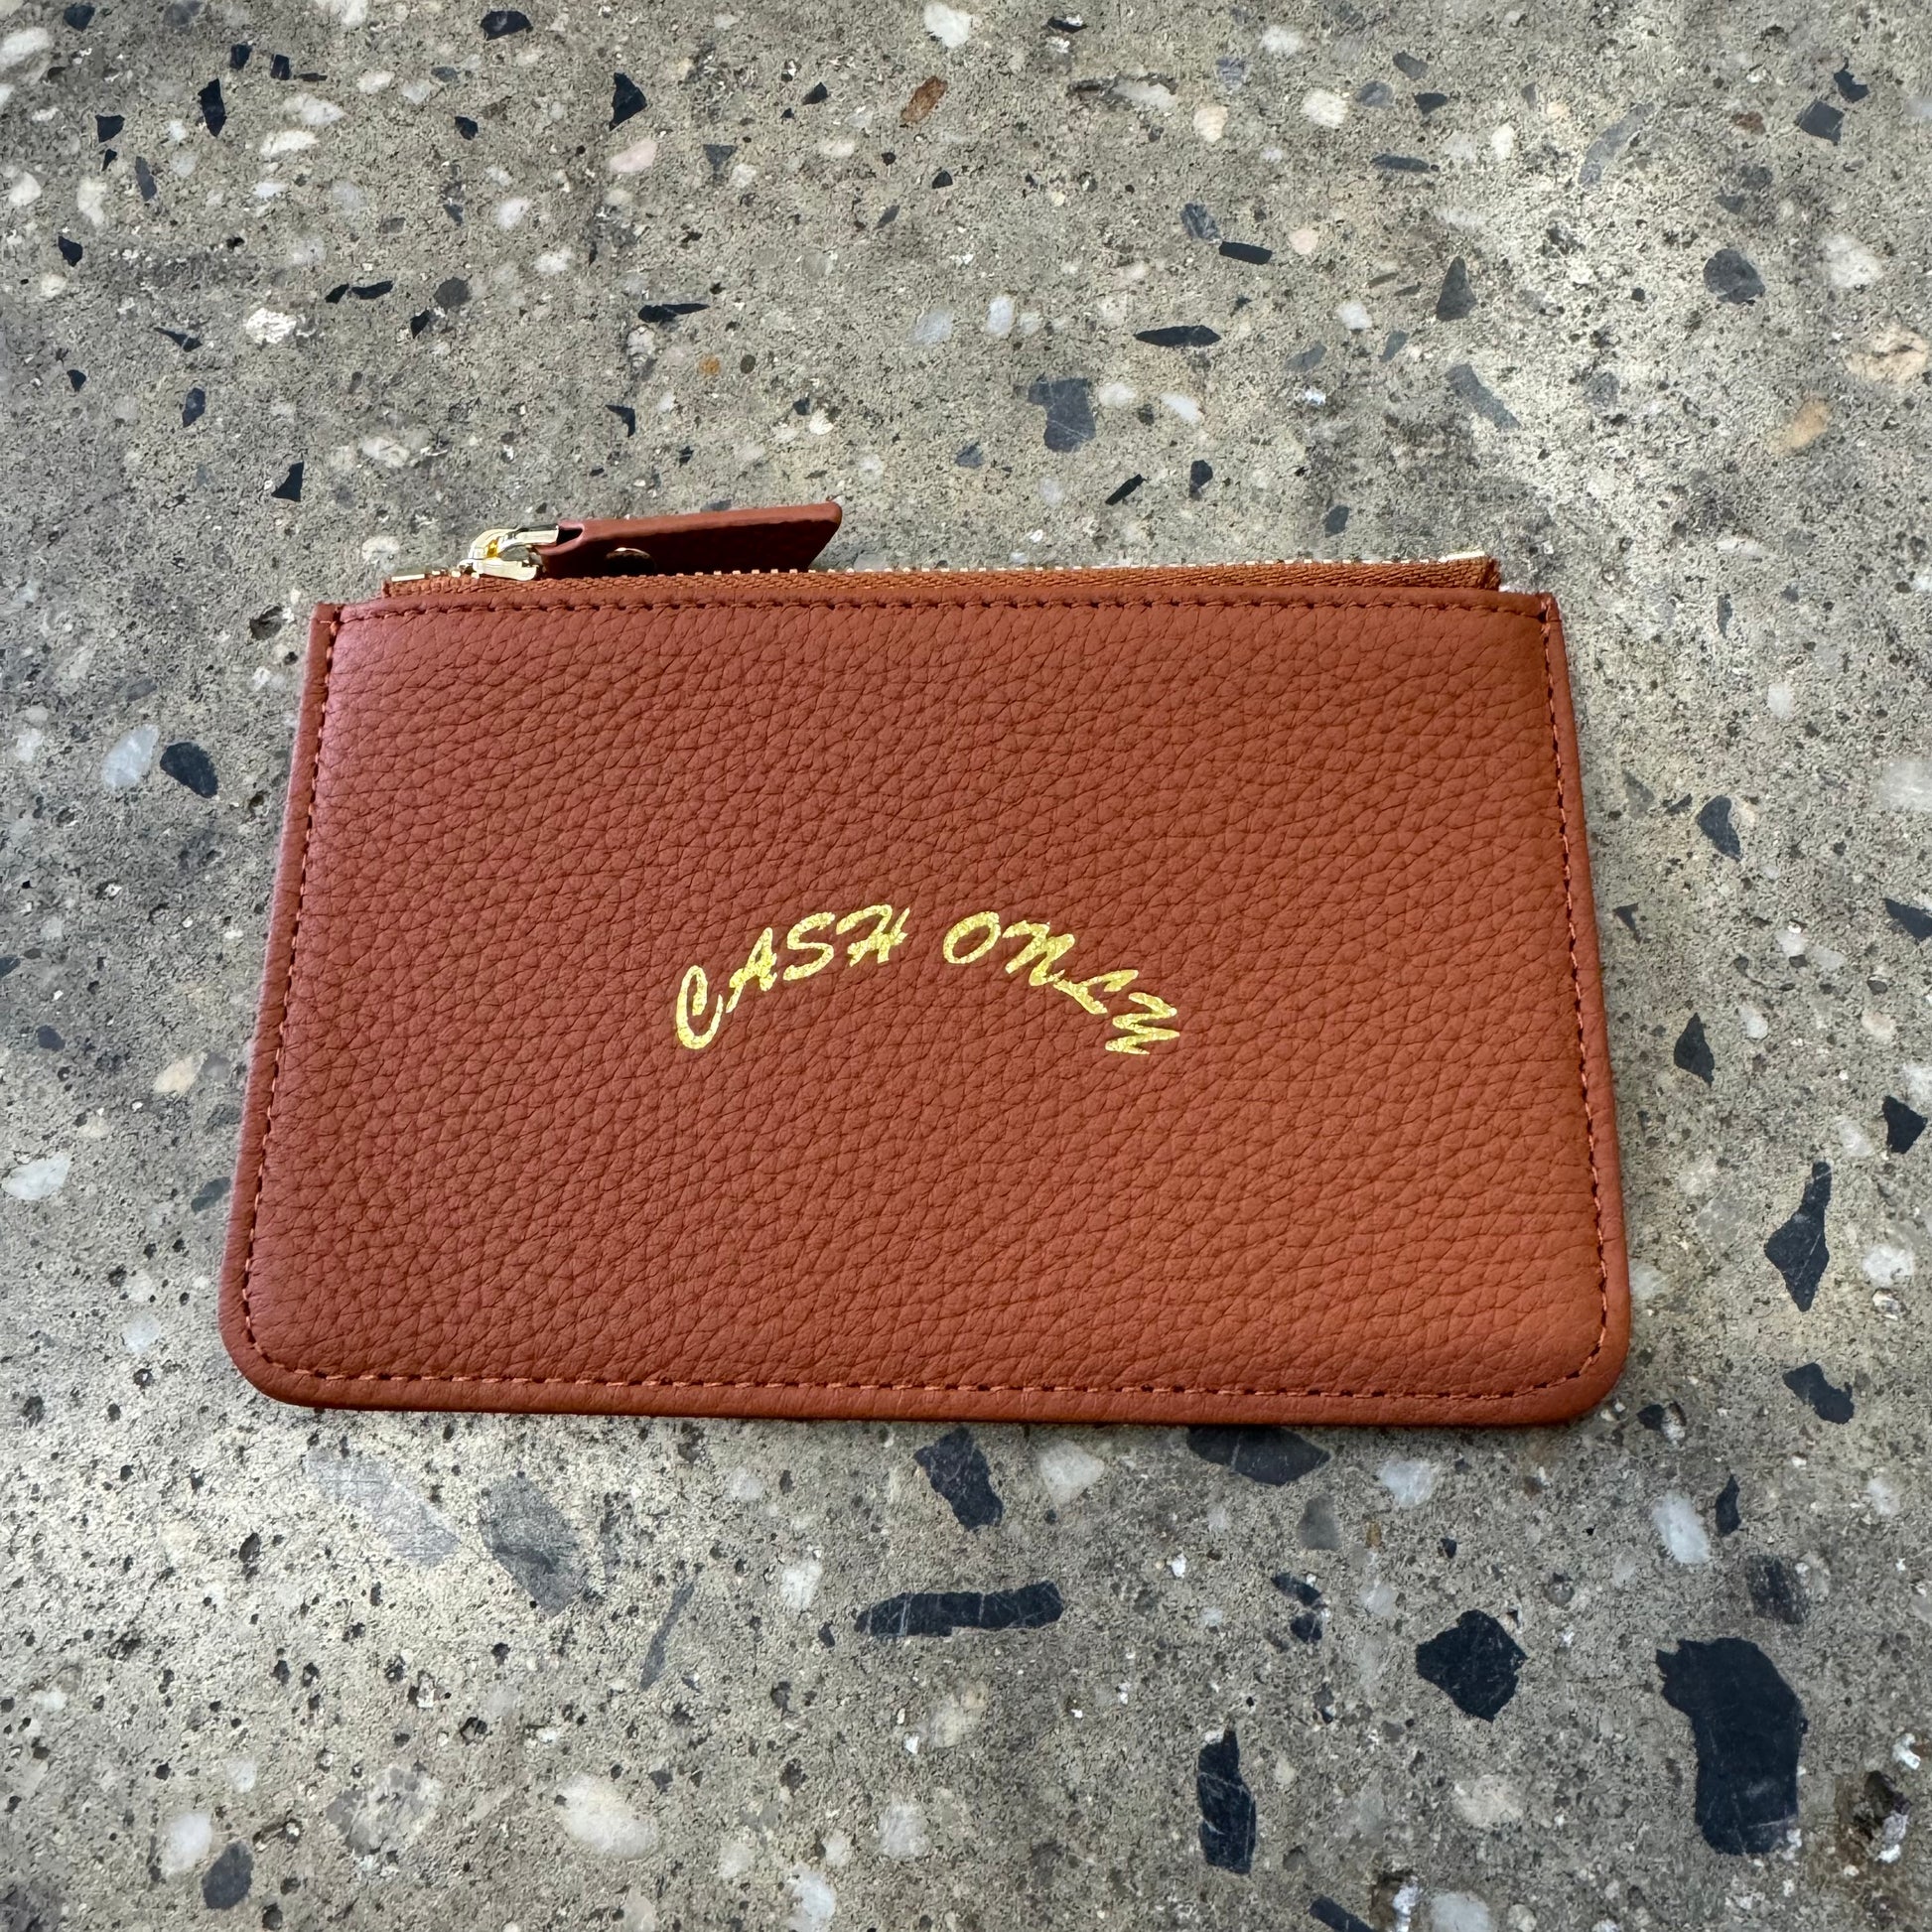 Gold cash only logo stamped on center of leather zip wallet